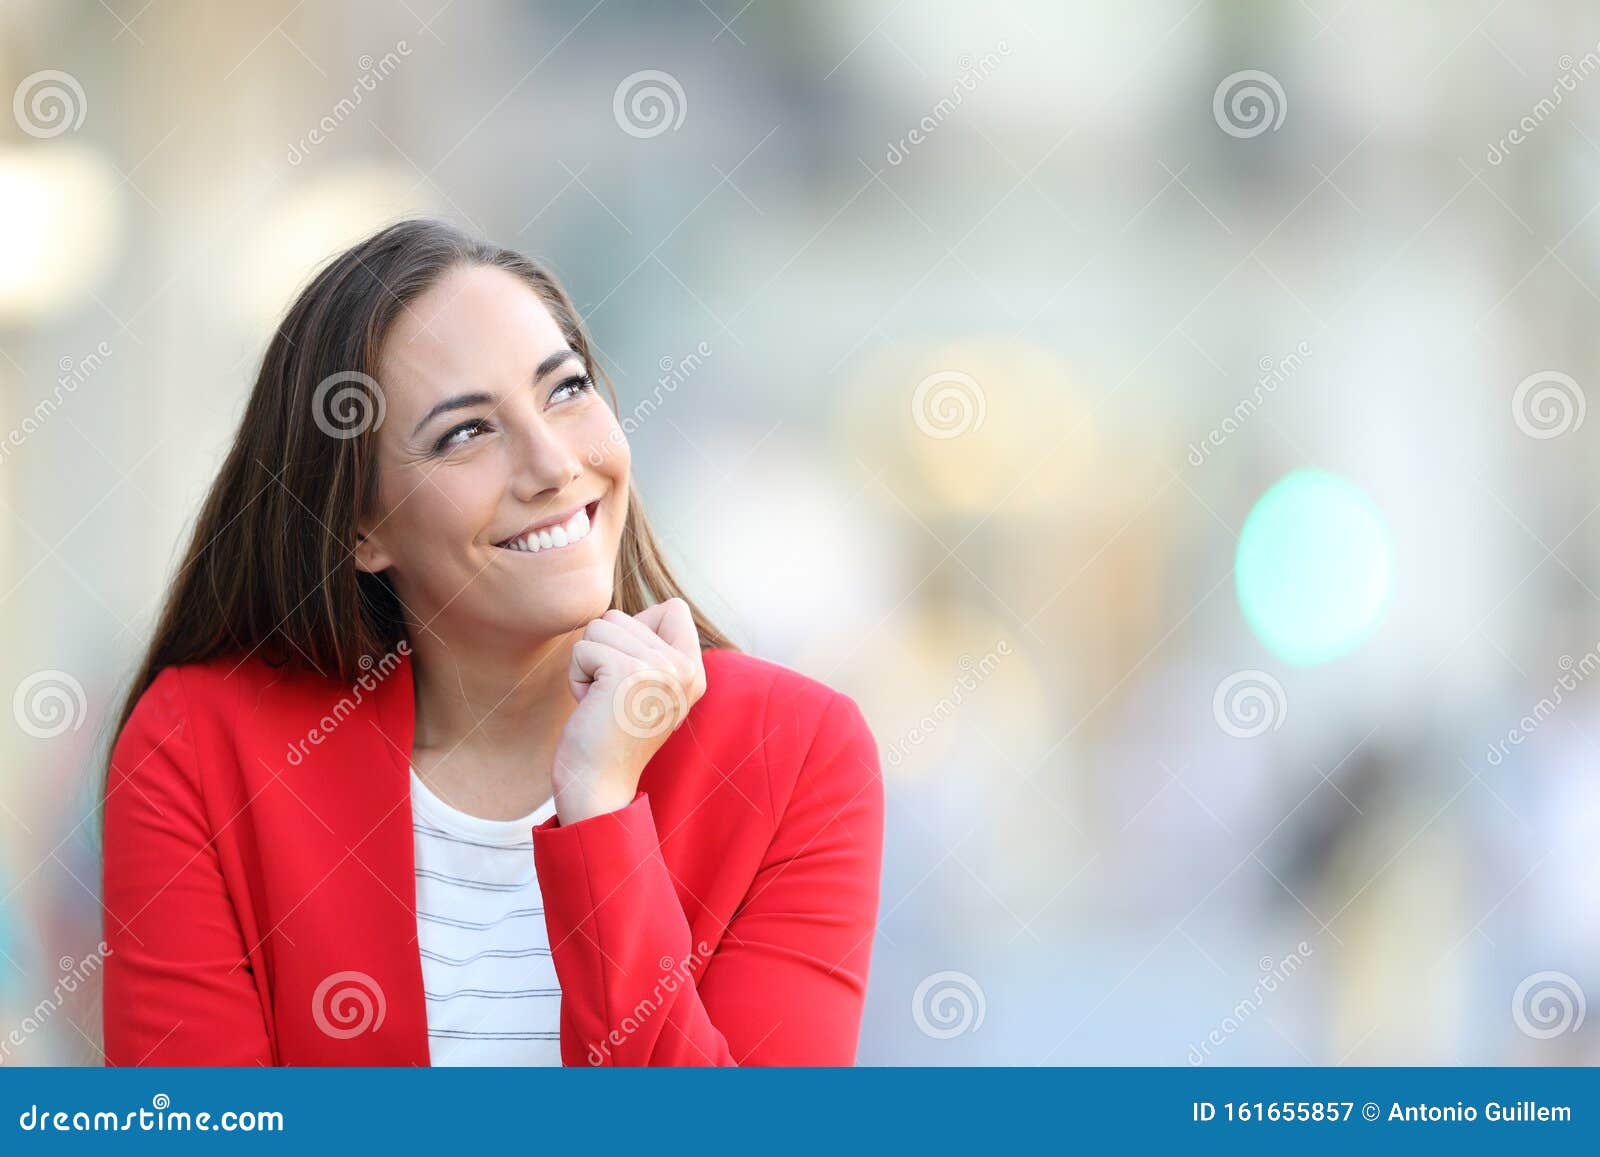 candid woman thinking looking at side in the street